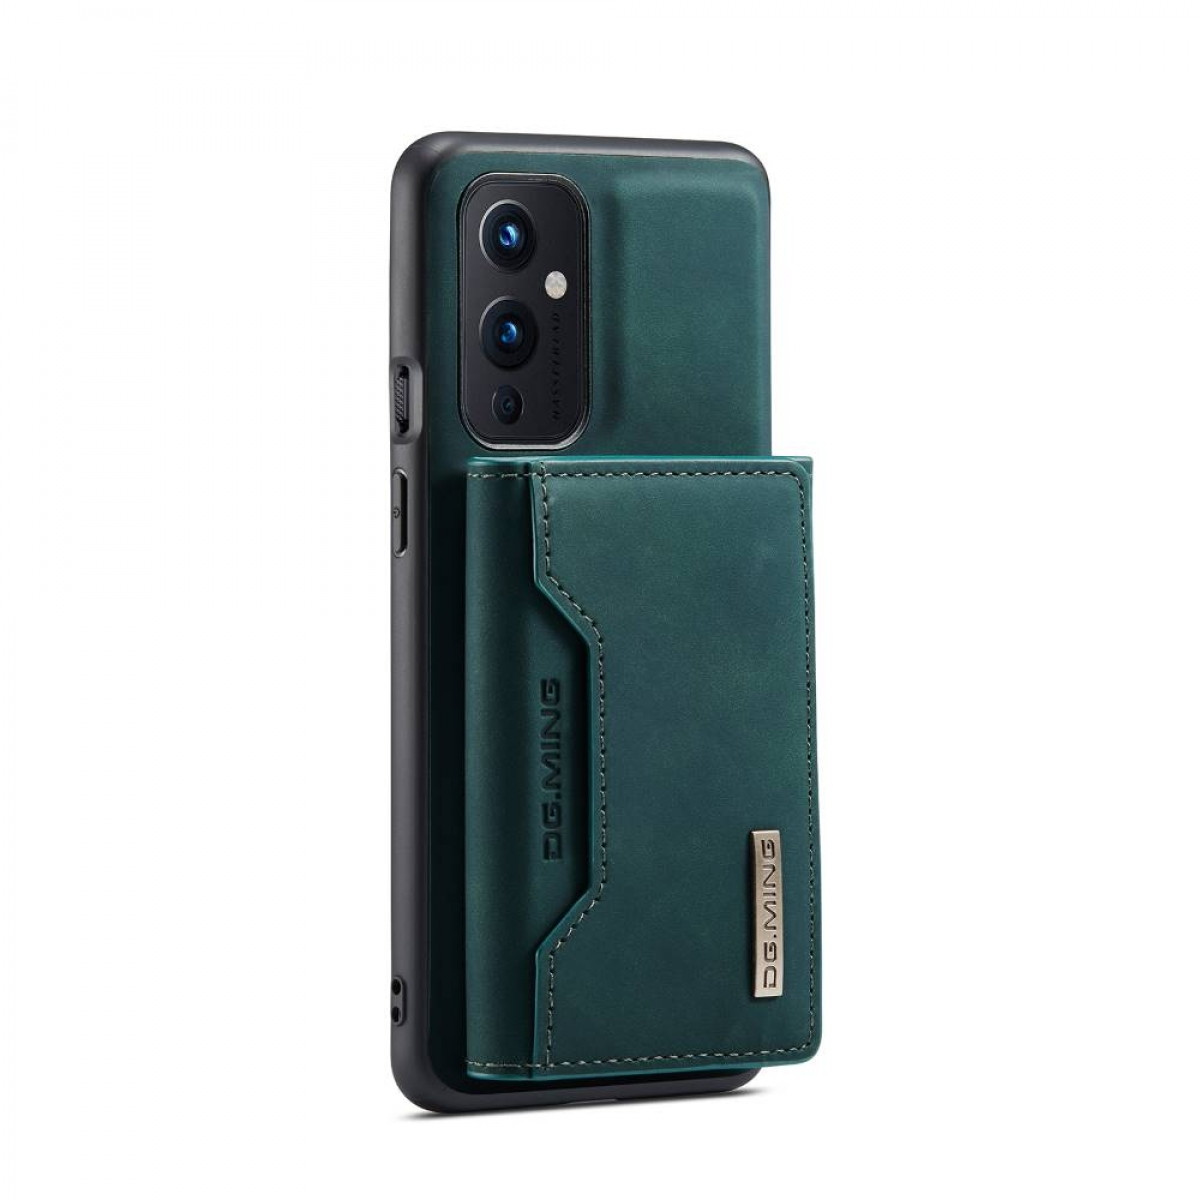 DG MING Backcover, 2in1, M2 9, OnePlus, Petrol